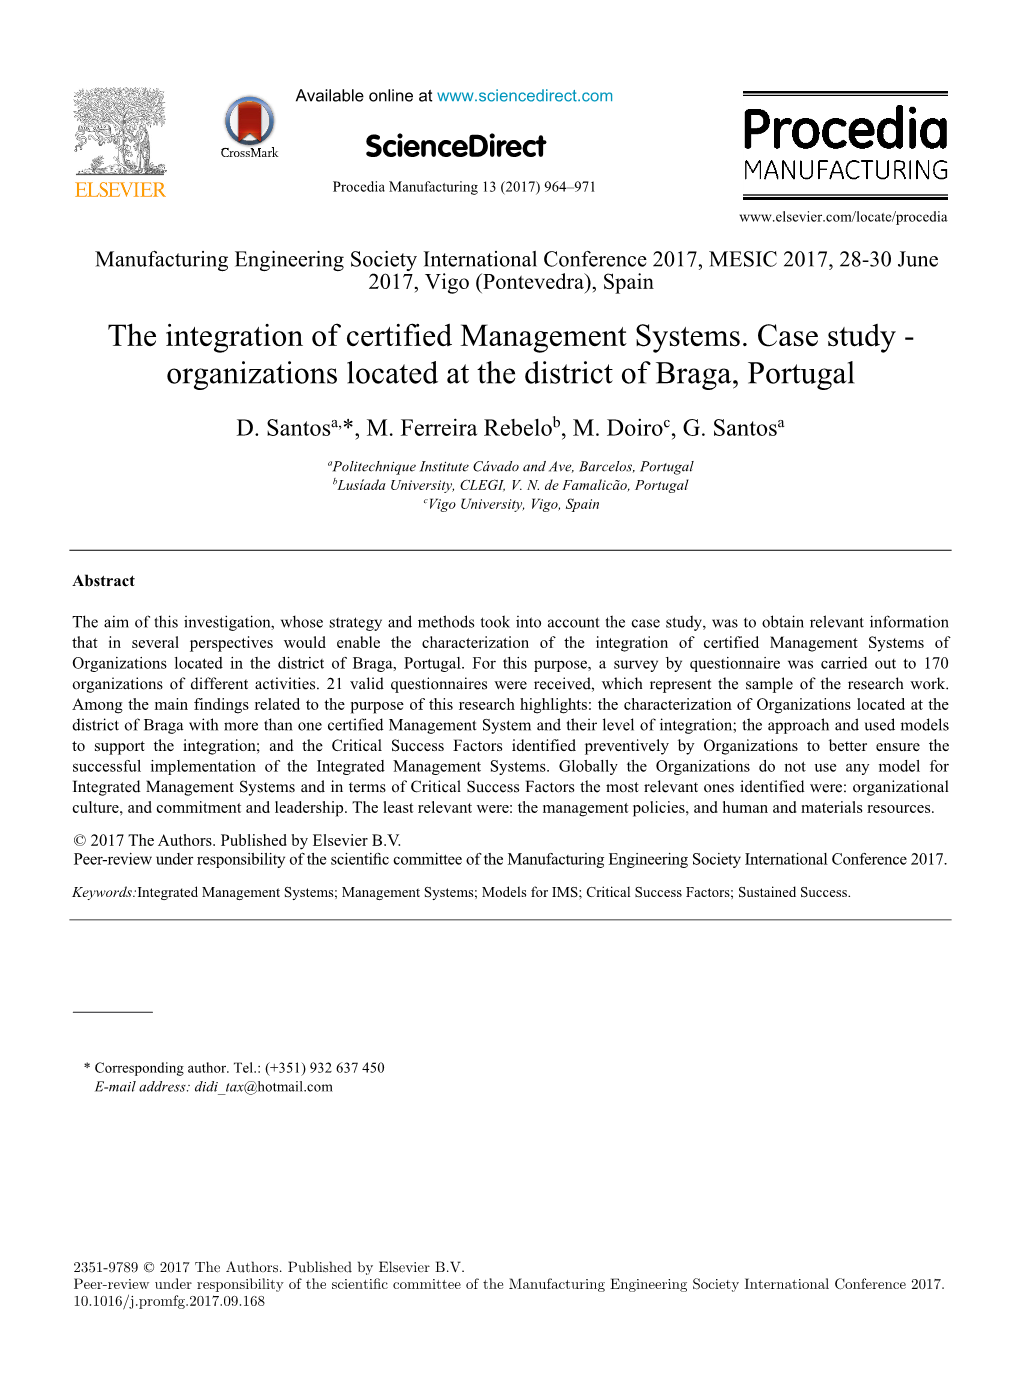 Organizations Located at the District of Braga, Portugal Standardized MS Into Only One Coherent and Lean MS